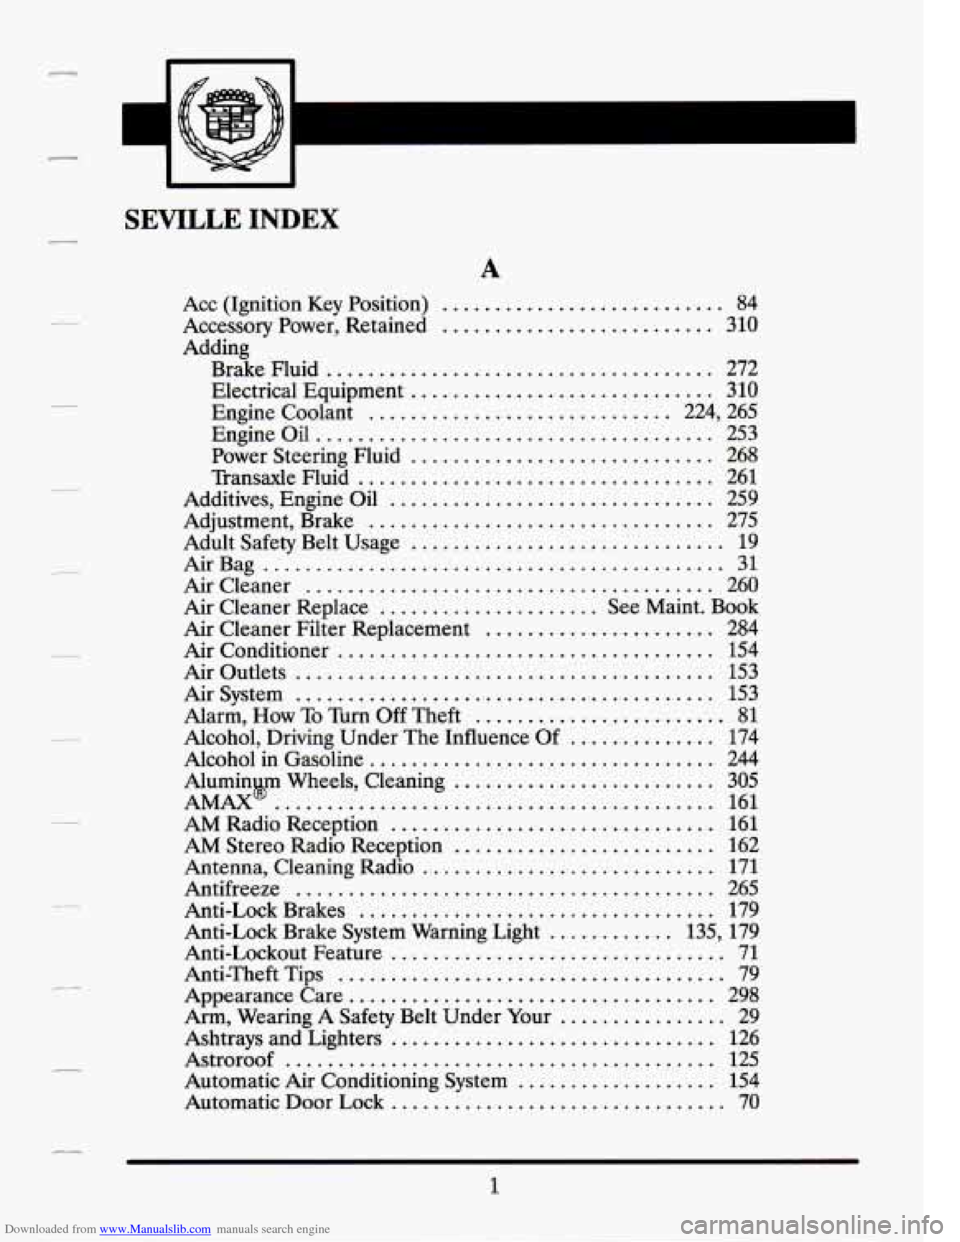 CADILLAC SEVILLE 1994 4.G Owners Manual Downloaded from www.Manualslib.com manuals search engine . . 
. 
. 
. 
. 
. 
. 
. 
. 
. 
. 
. 
-1 
SEVILLE INDEX 
A 
ACC (Ignition  Key Position) ........................... 84 
Accessory  Power.  Ret